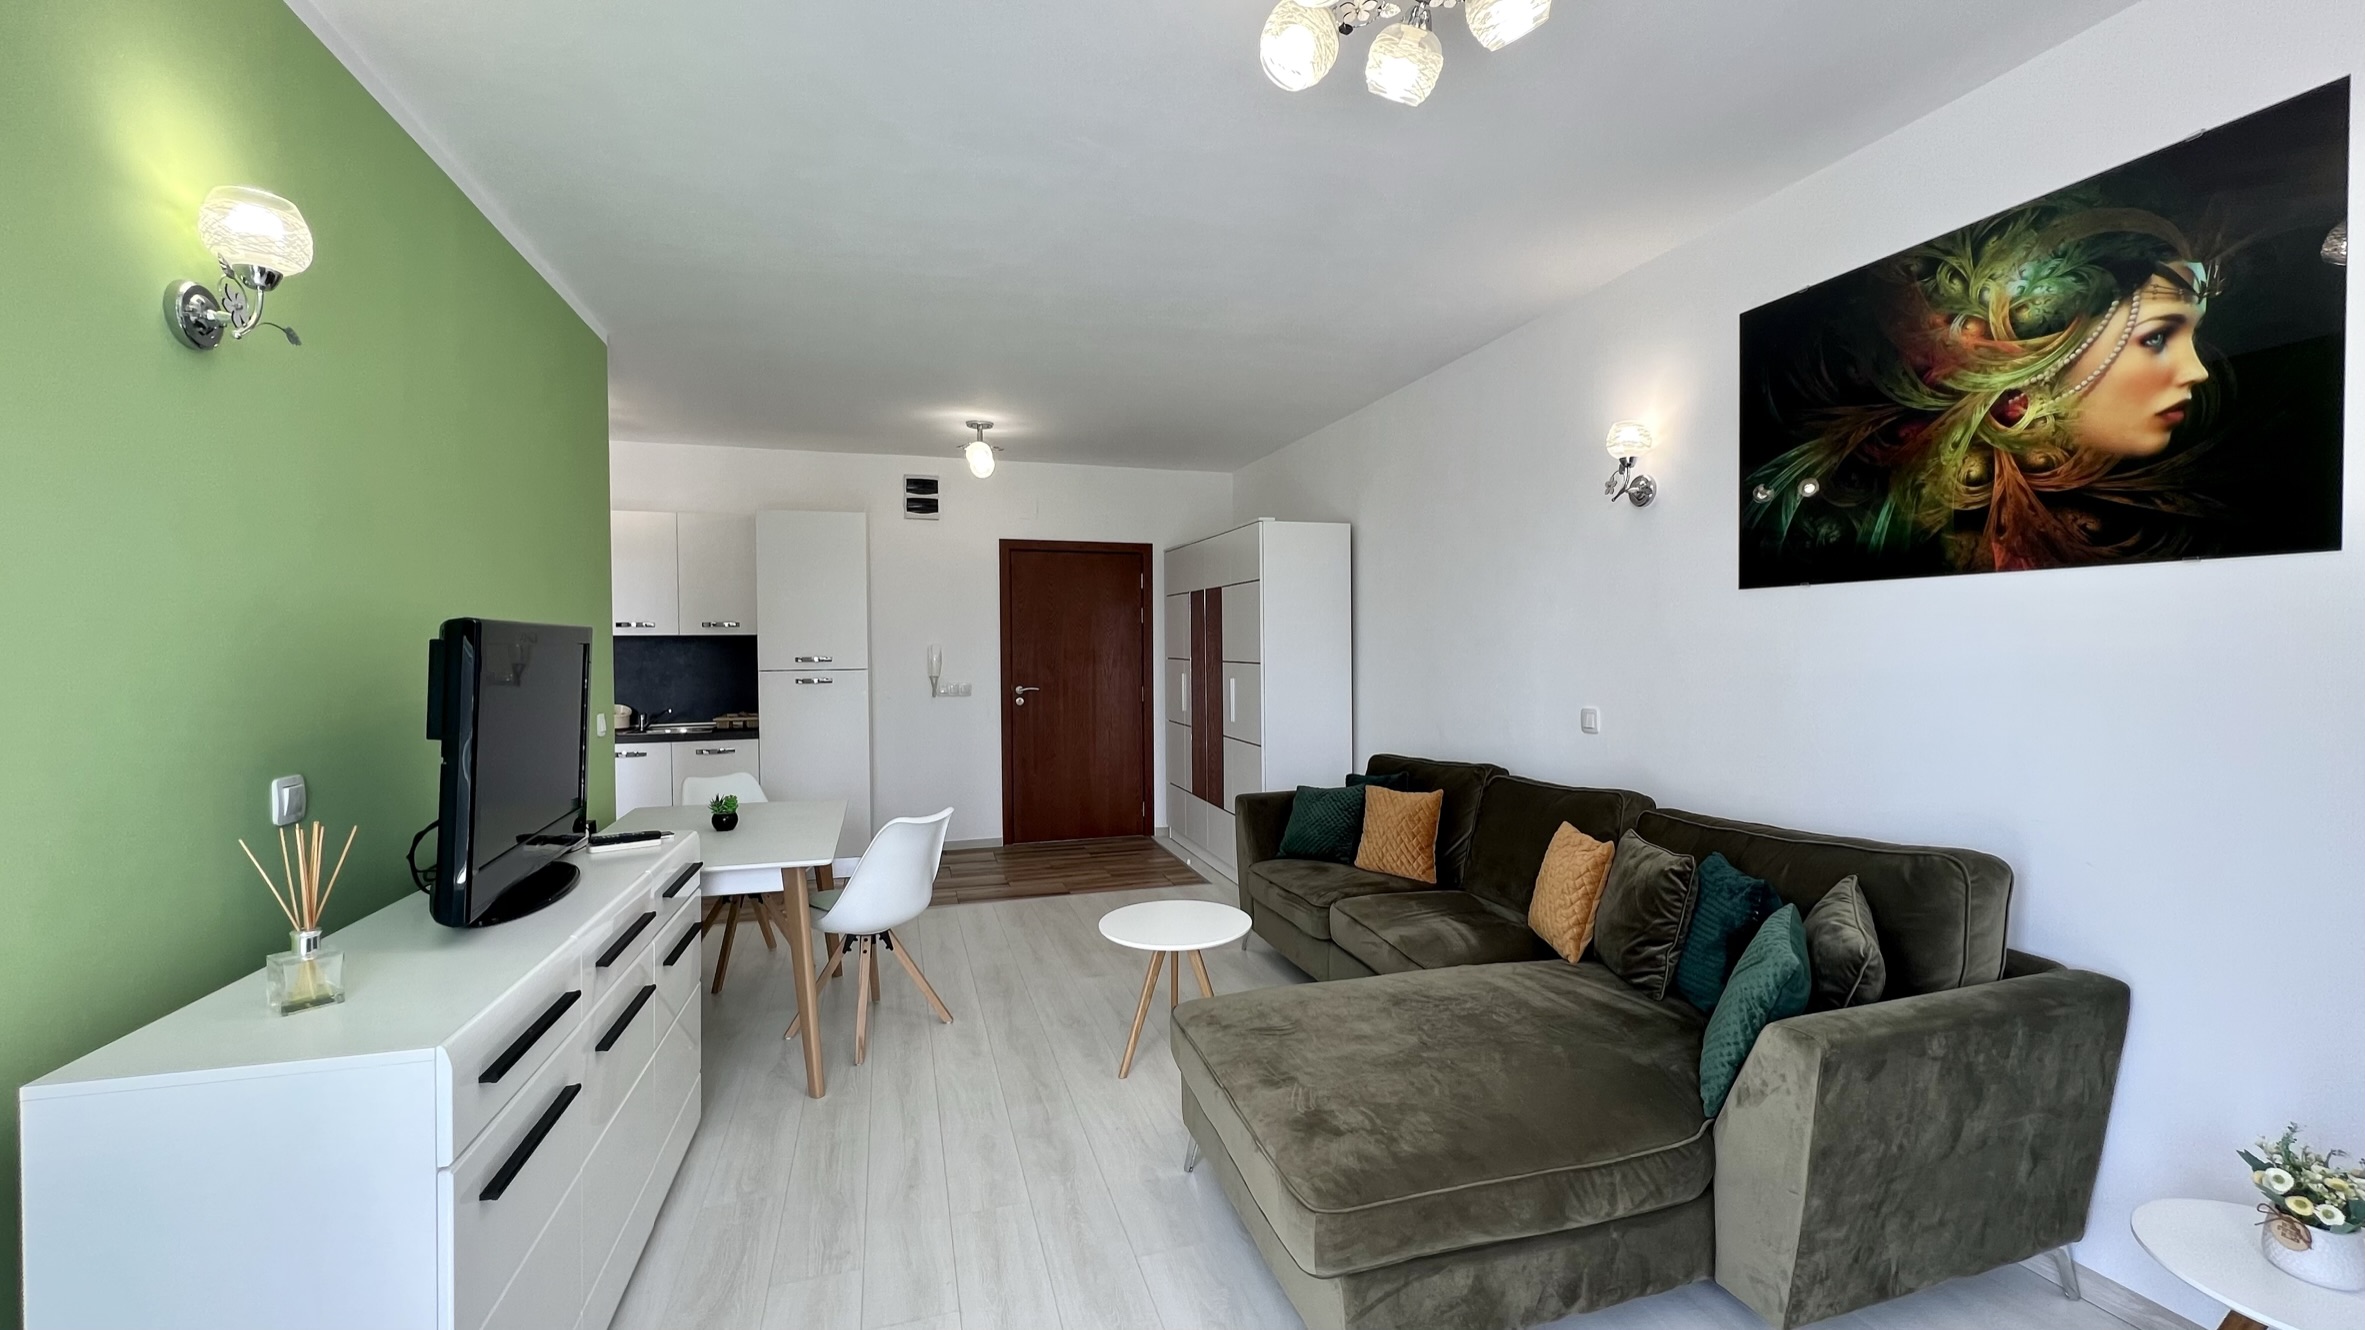 Asteria appartement woonkamer 2